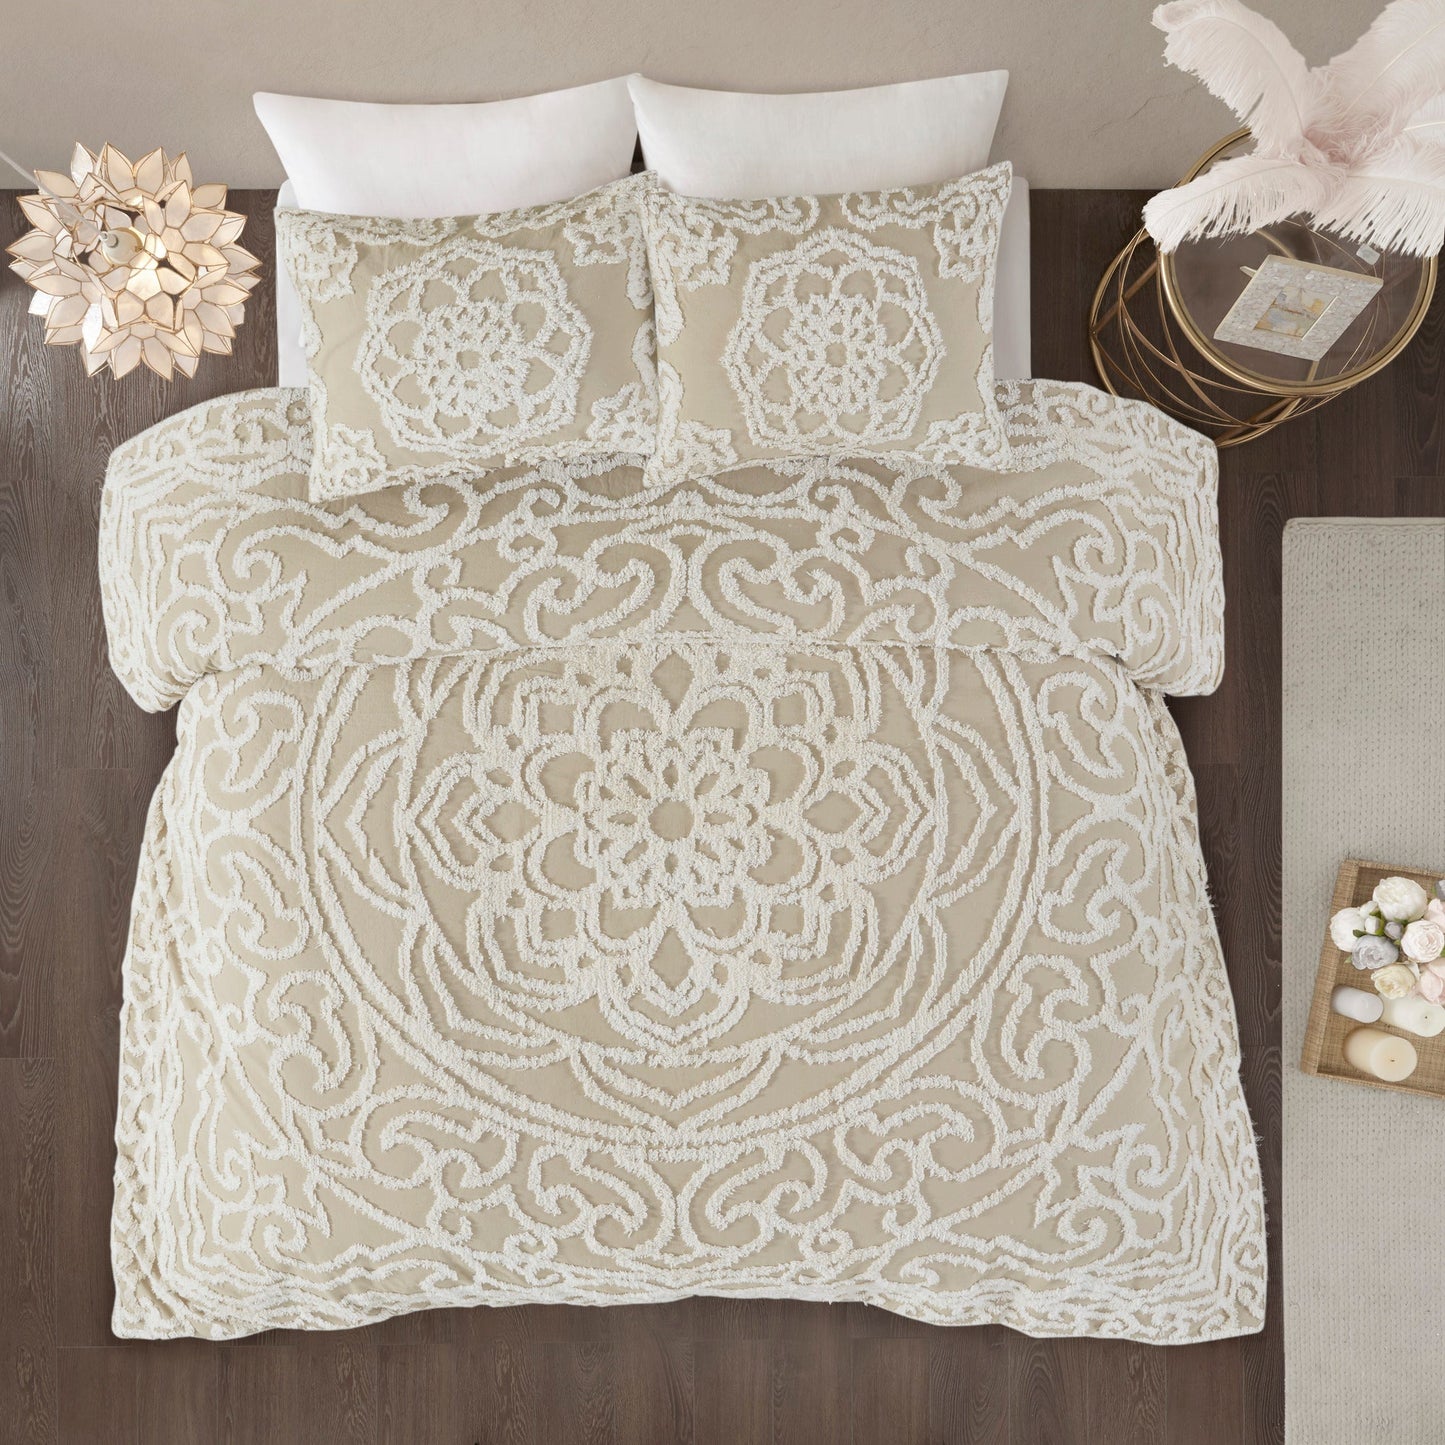 Cecily Tufted Cotton Chenille Medallion Duvet Cover Set Taupe